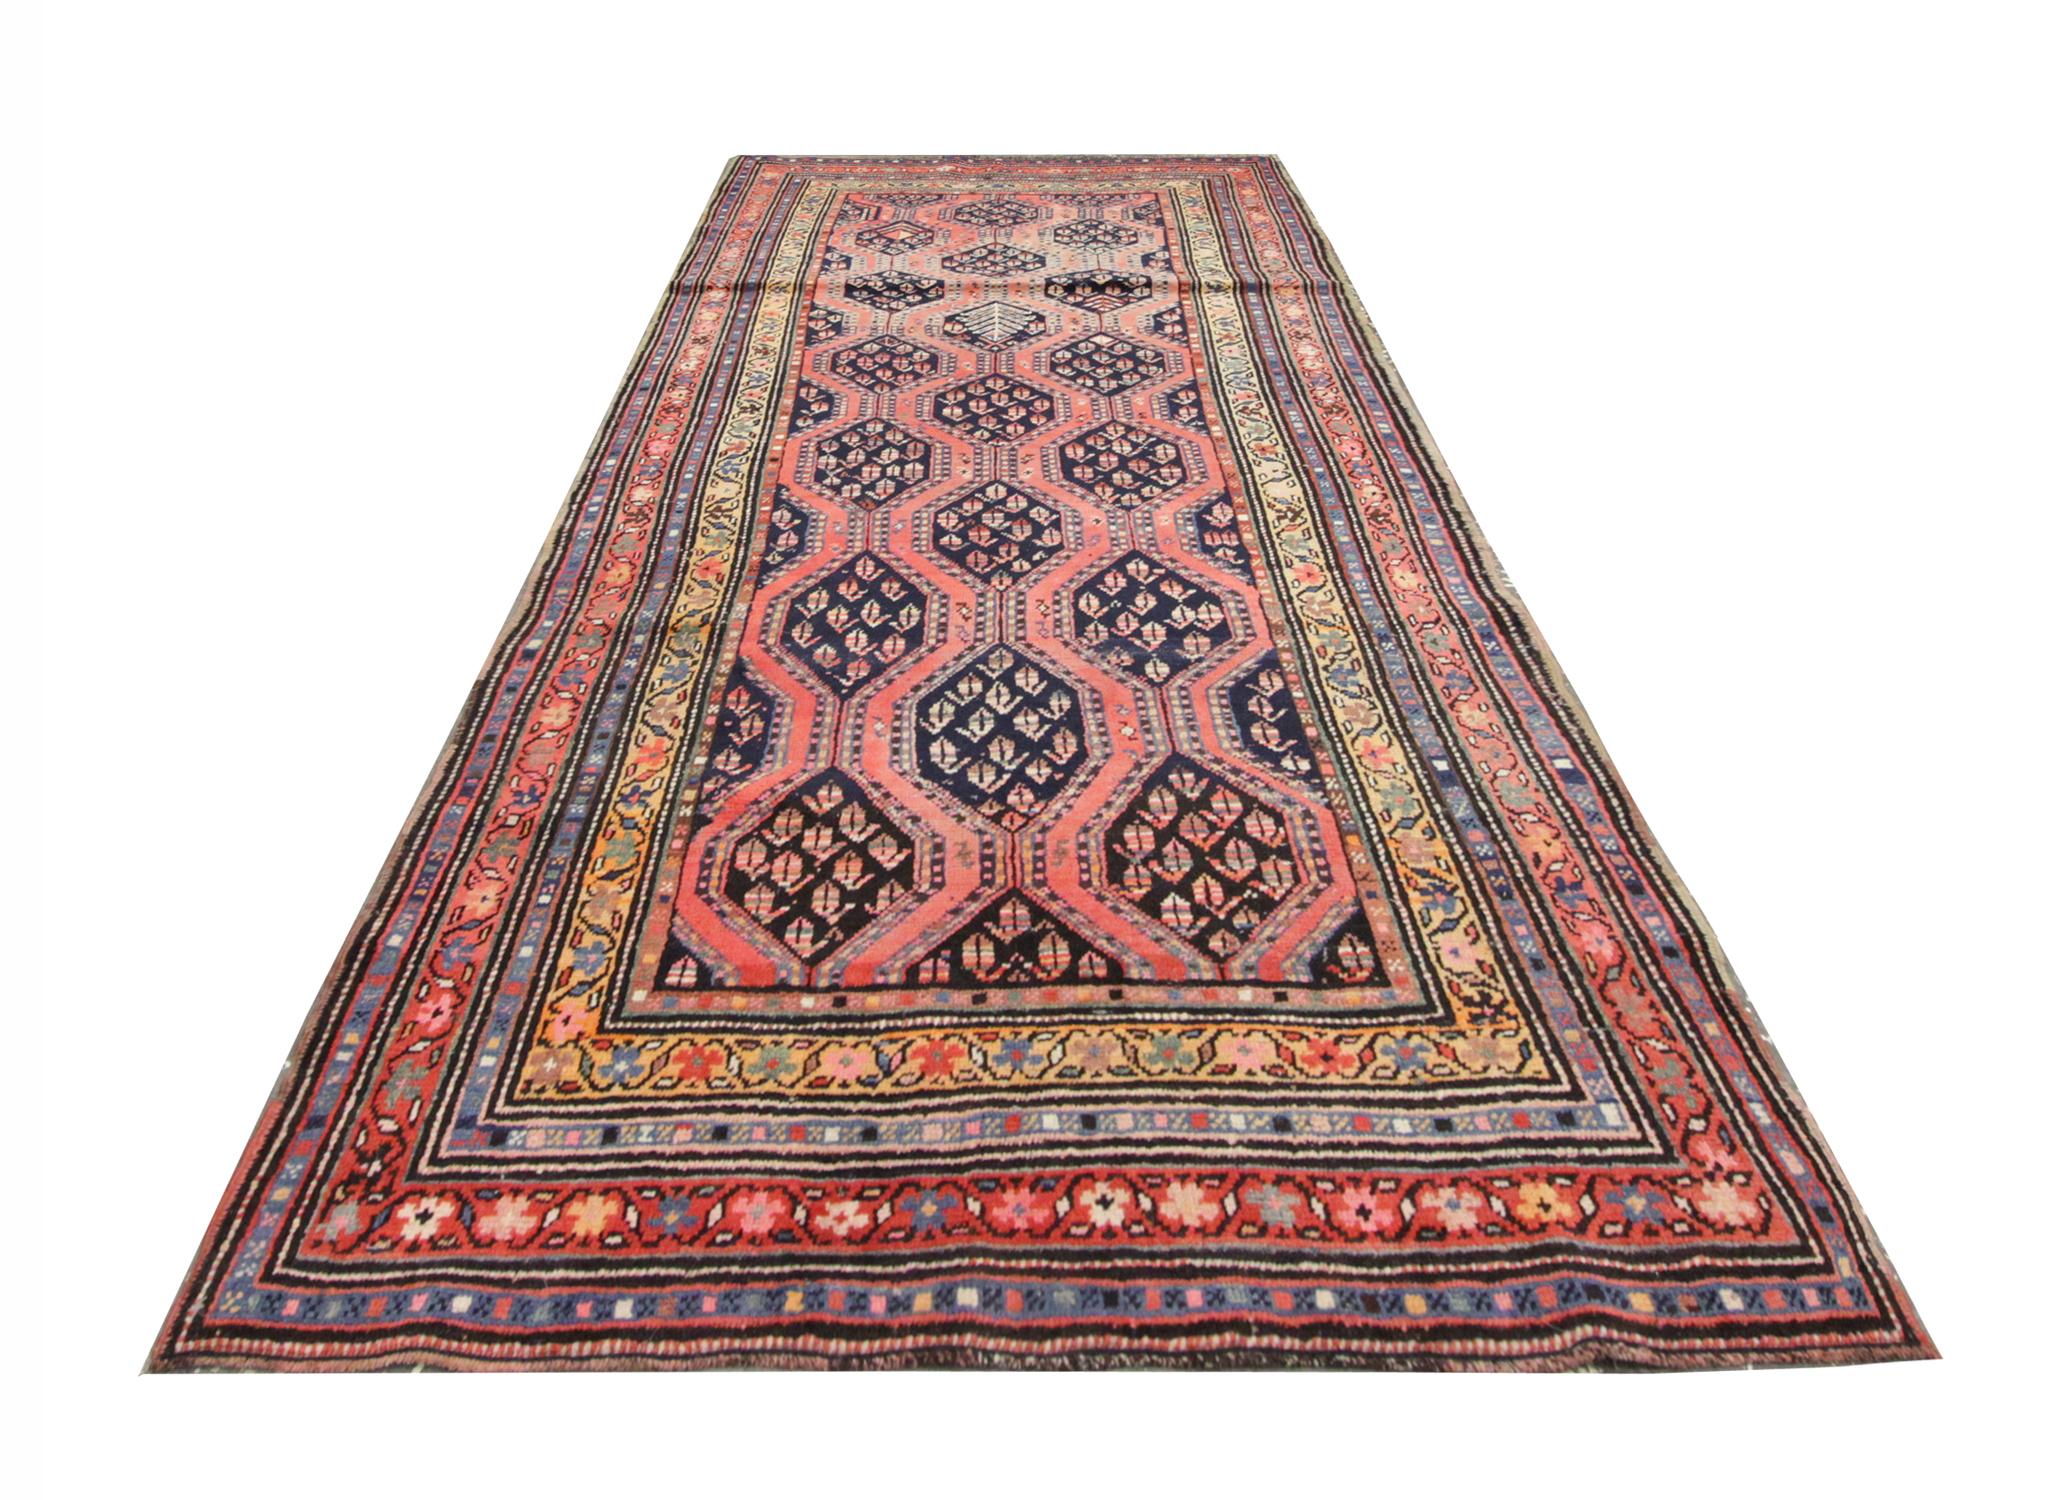 This stunningly detailed runner rug has been beautifully handwoven in many beautiful colourways. A multi-layered border or linear floral patterns in Blue, pink, and yellow frames the central design. On a background of peachy pink sits a symmetrical